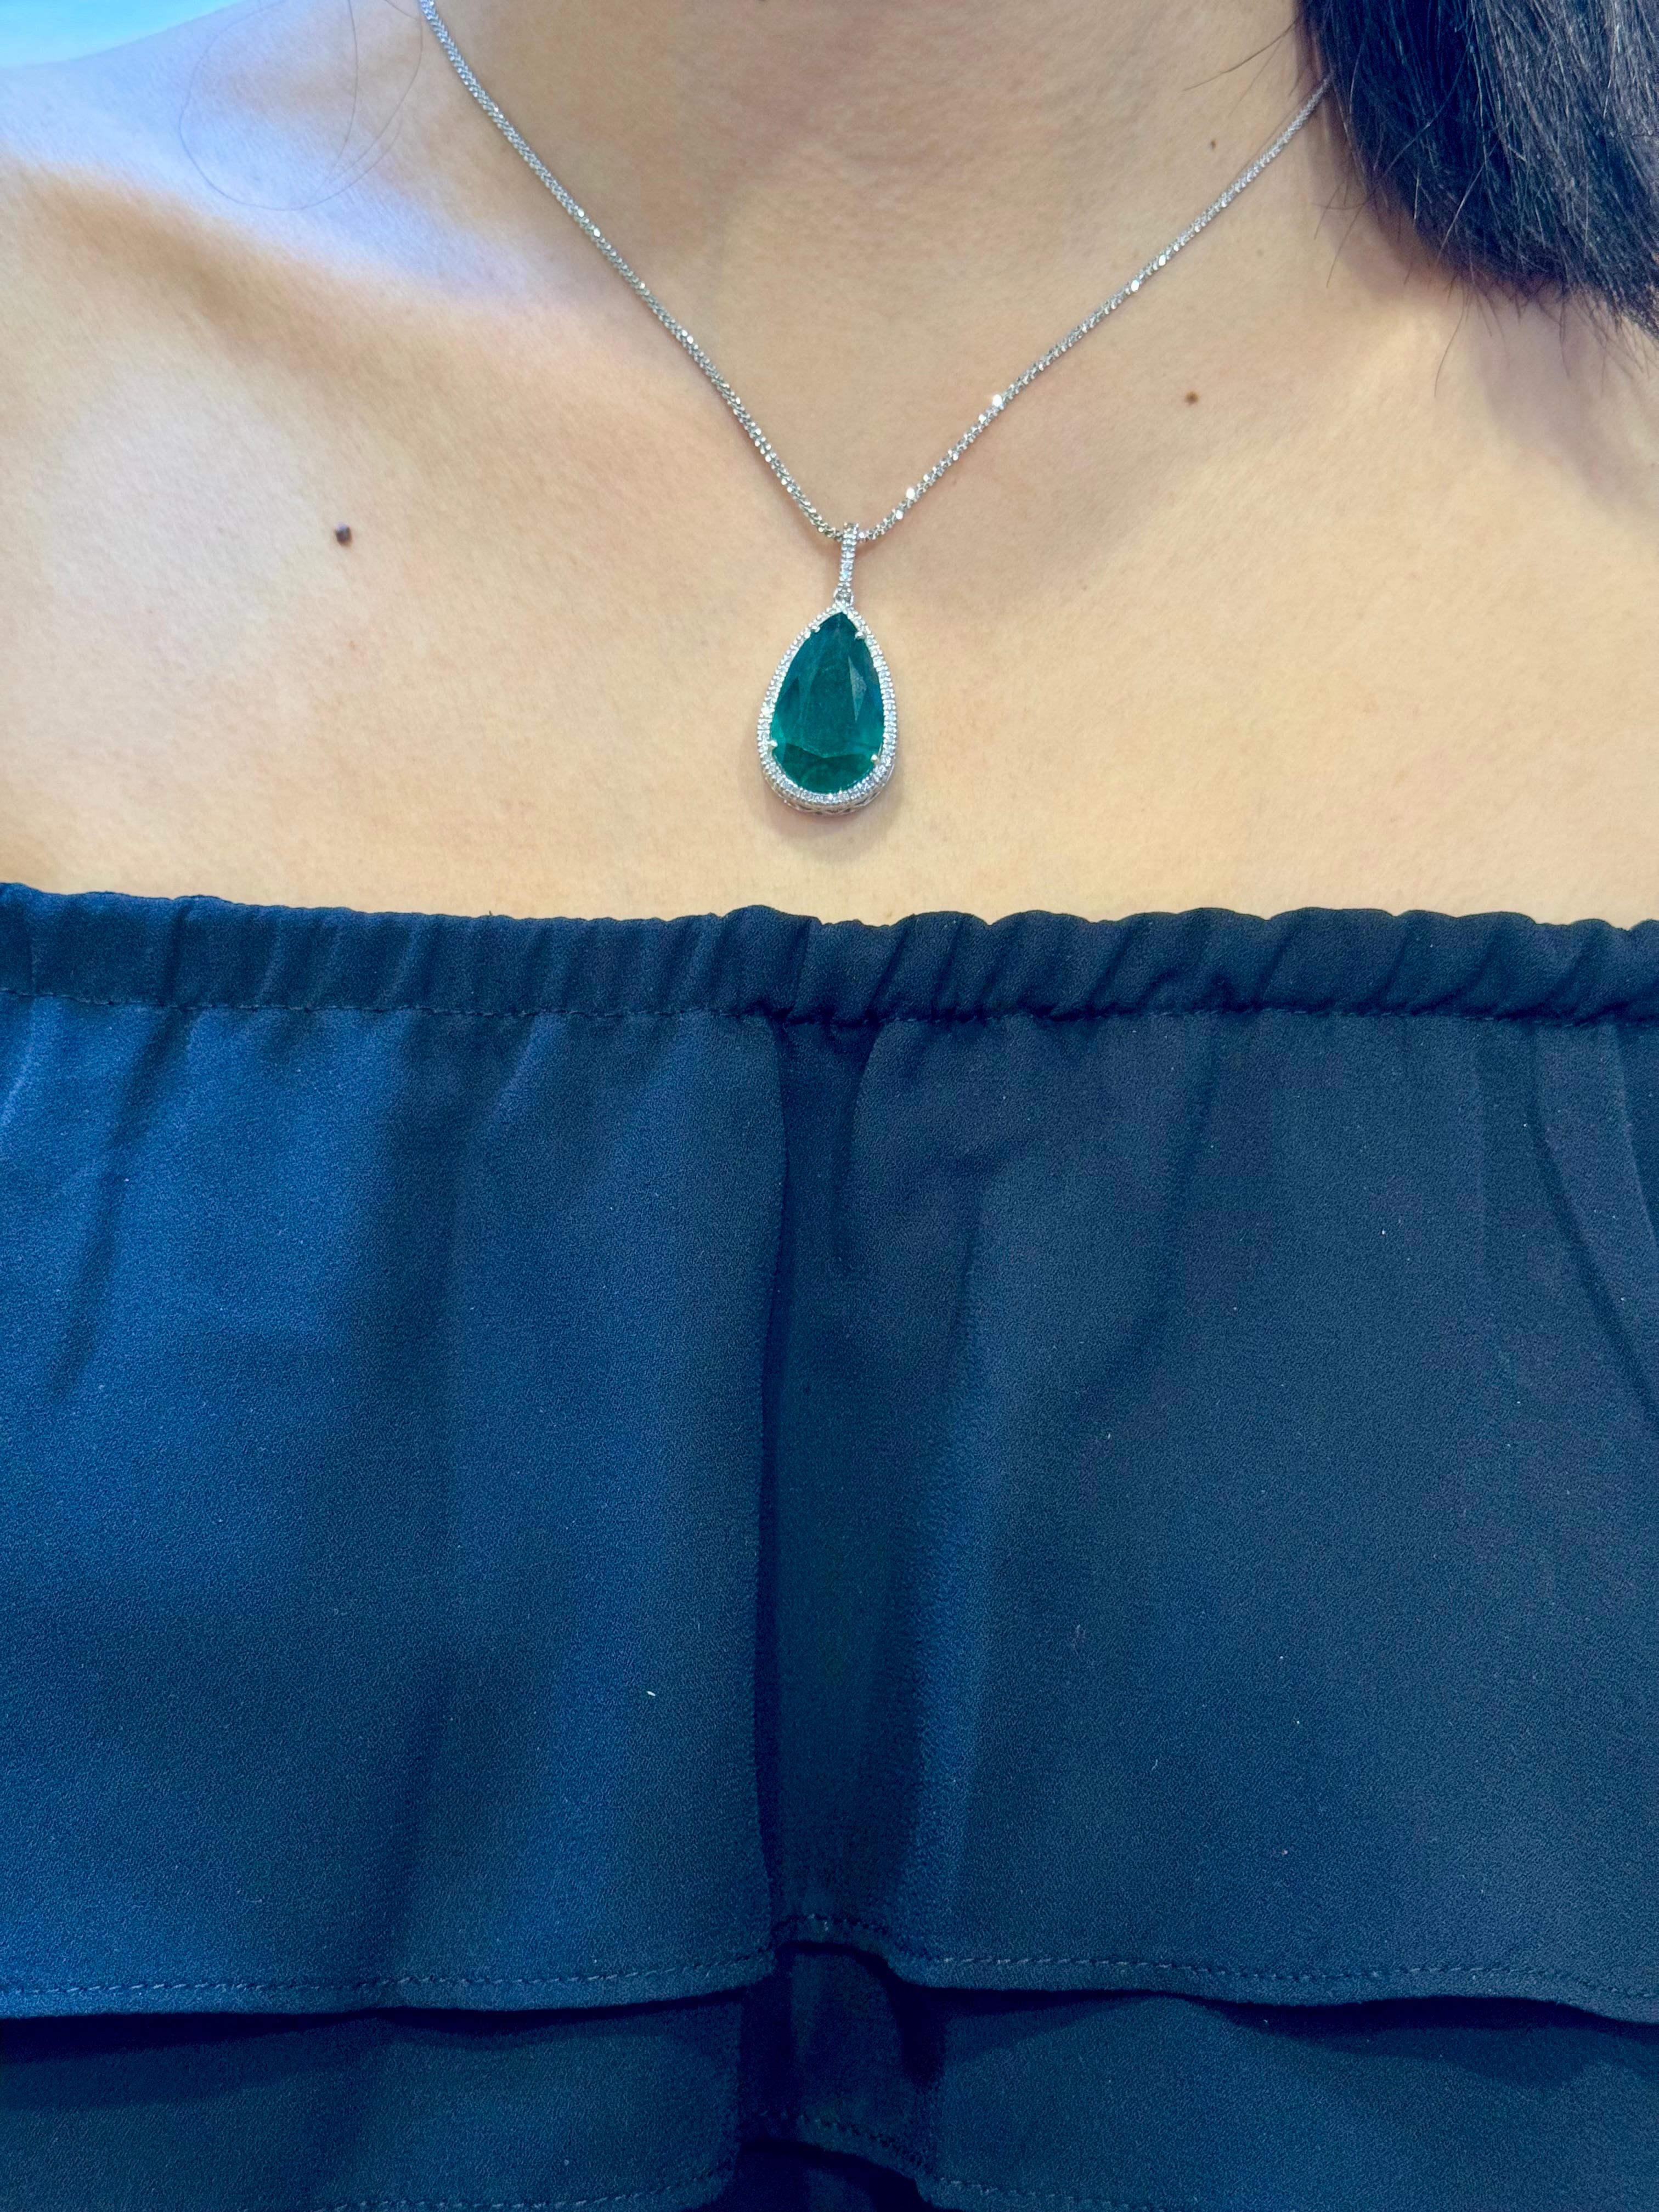 19 Ct Pear Cut Emerald & 1 Ct Diamond Halo Pendent/Necklace 14 KW Gold Chain For Sale 12